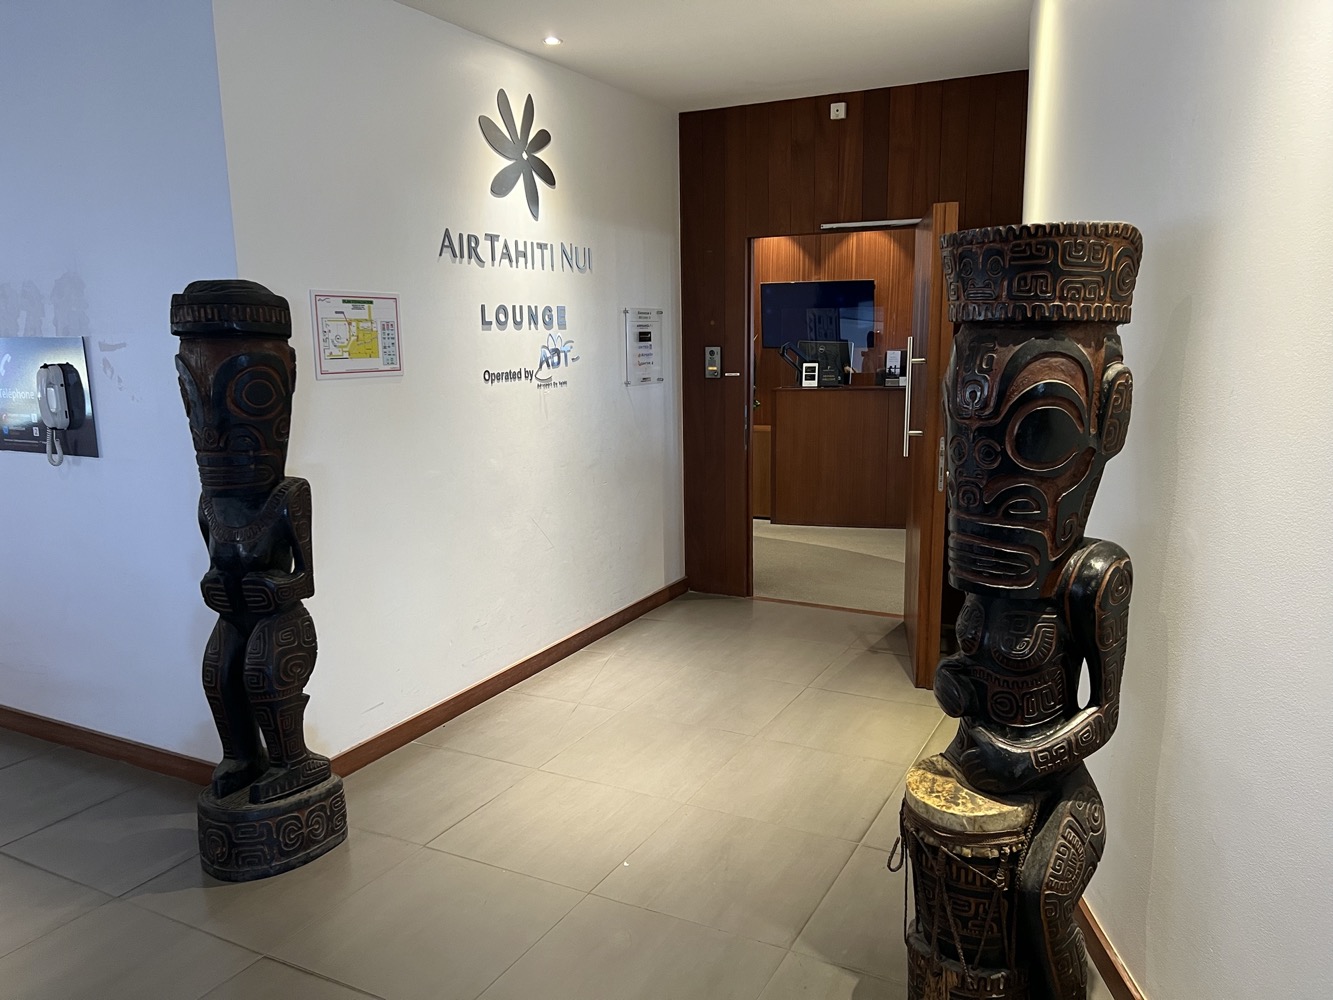 a wooden statues in a hallway